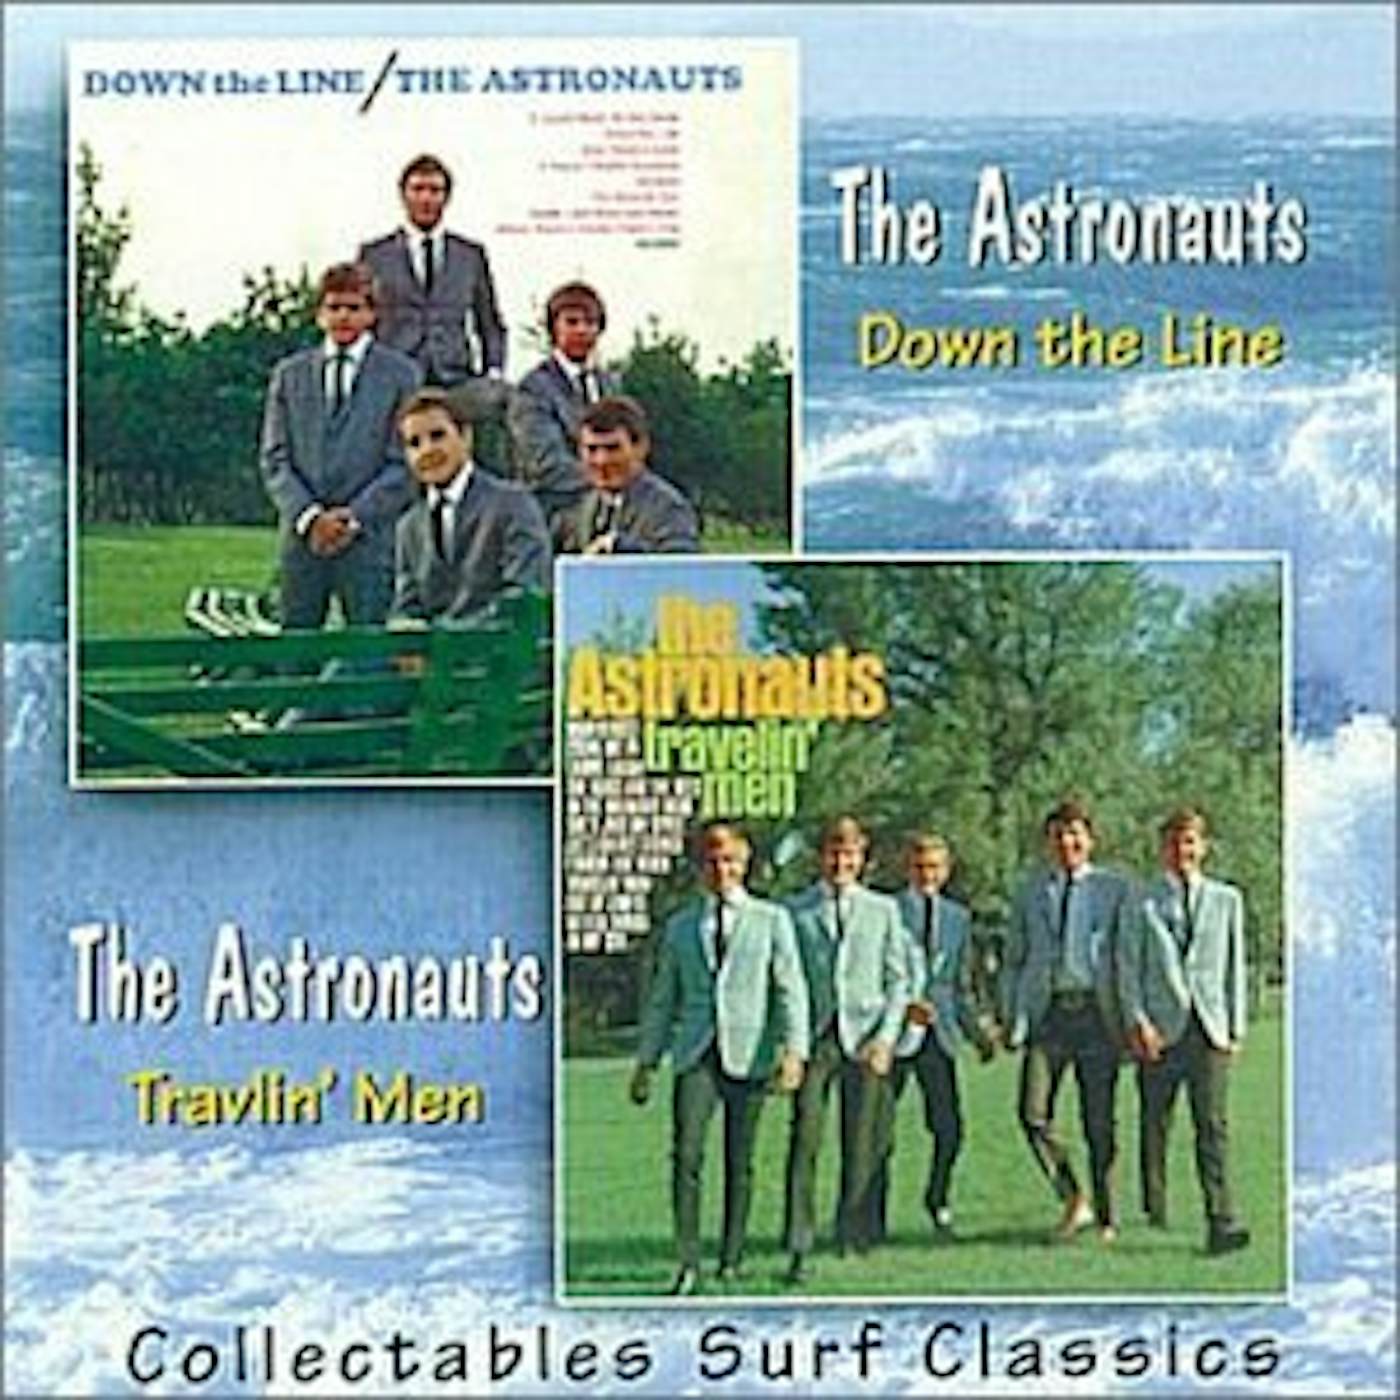 The Astronauts DOWN THE LINE / TRAVELIN MAN CD